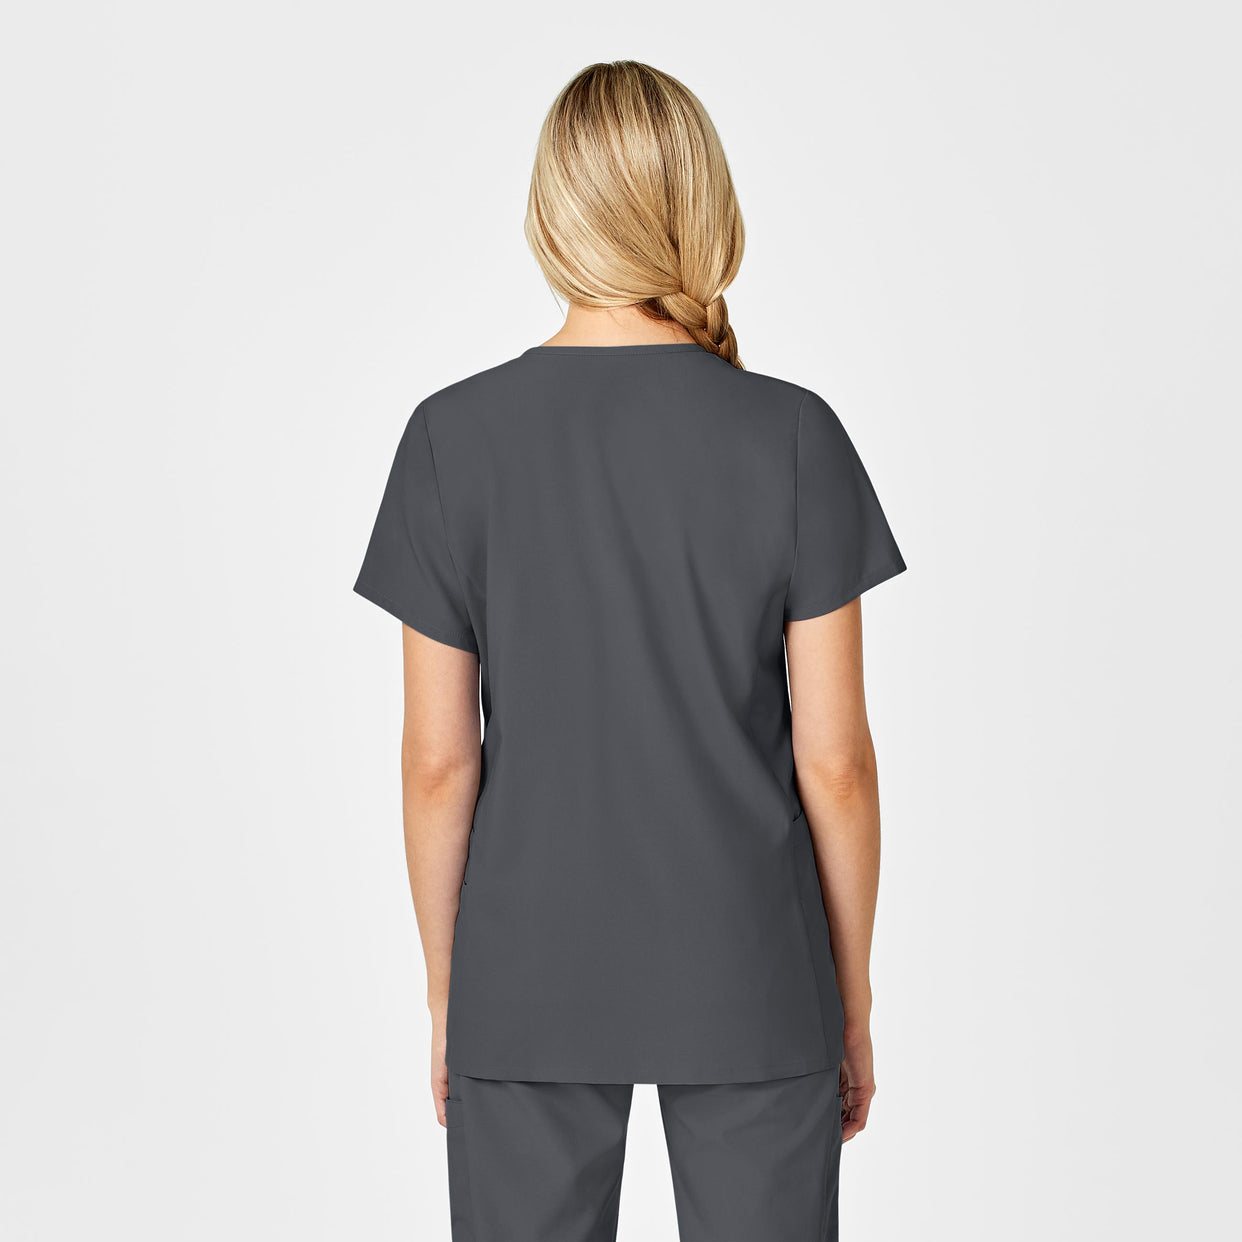 W123 Maternity V-Neck Scrub Top Pewter back view